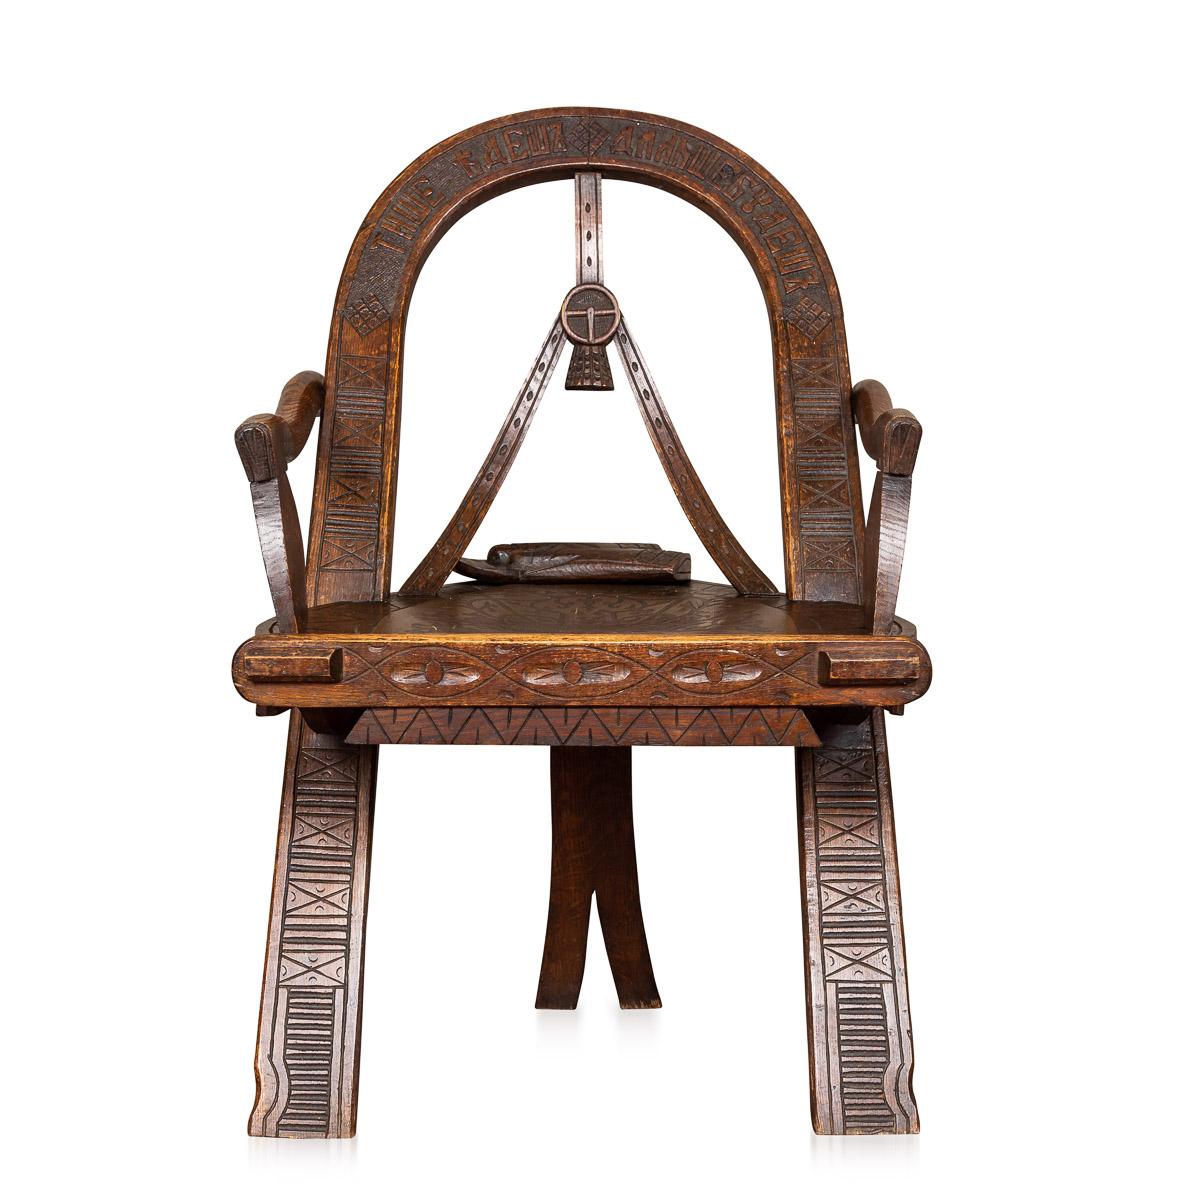 Antique 19th century Russian wood armchair carved in trompe l'oeil with the back rest and front legs in the form of a horses harness carved with the Russian inscription: Tishe edesh - dal'she budesh (Driving slower, you will advance further), with a